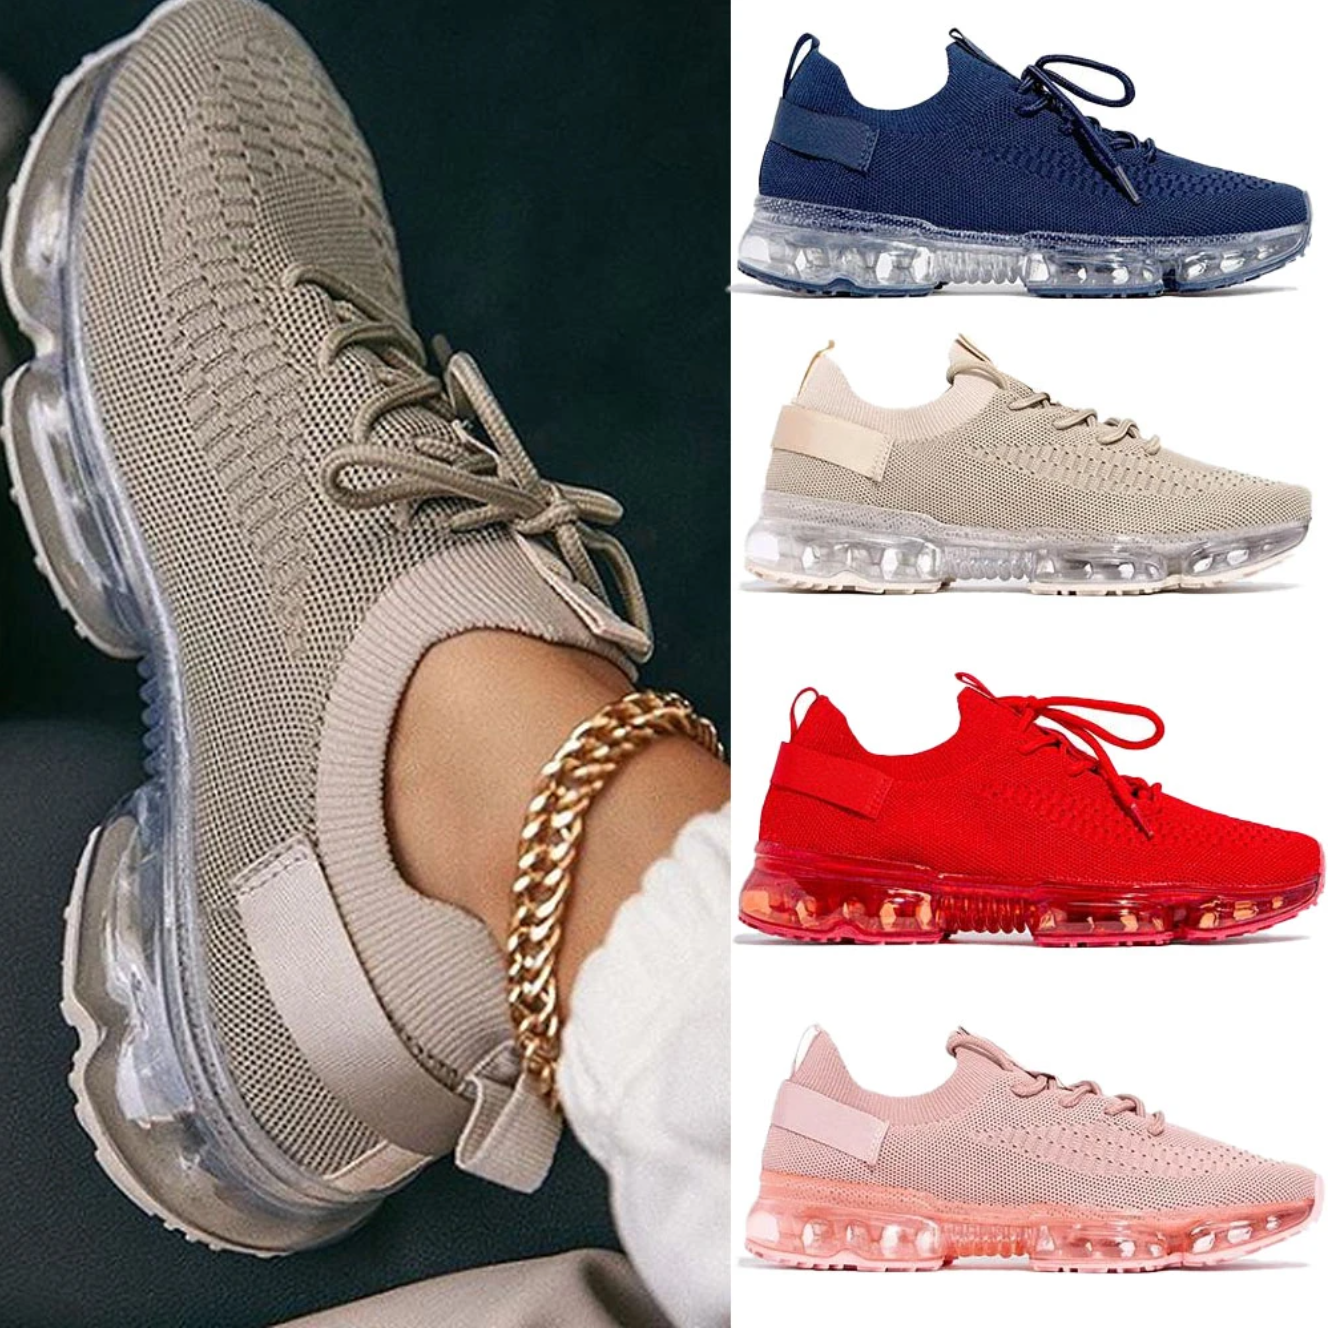 Women's Comfy Air Cushion Sneakers, Breathable Shoes Walking Running Shoes [Limited time offer: Buy 2 Save More 15%]